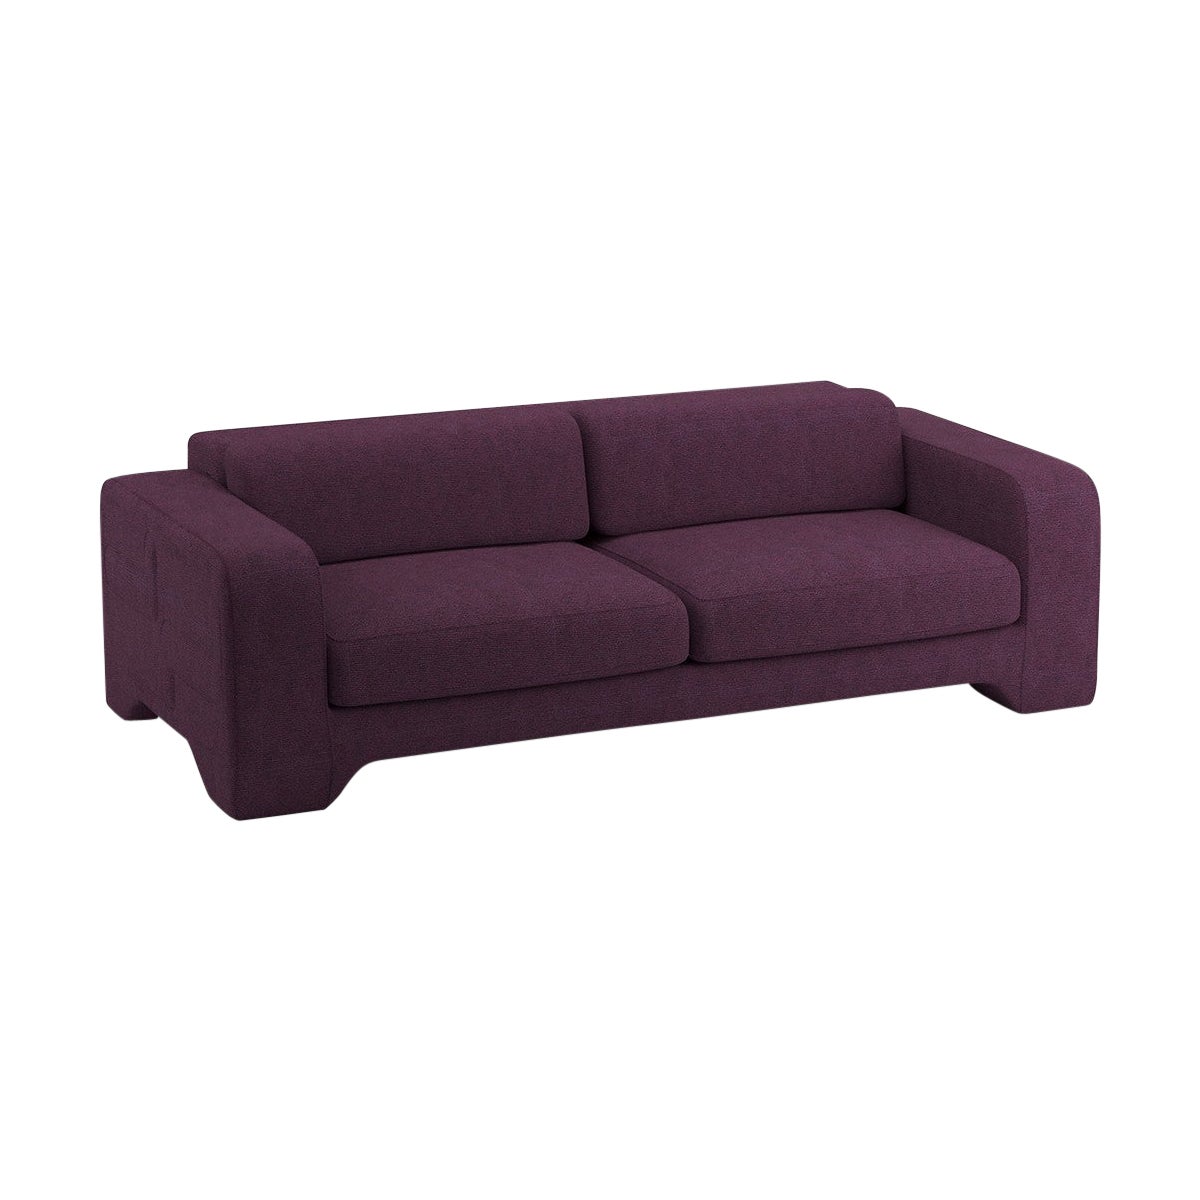 Popus Editions Giovanna 2.5 Seater Sofa in Eggplant Megeve Fabric Knit Effect For Sale